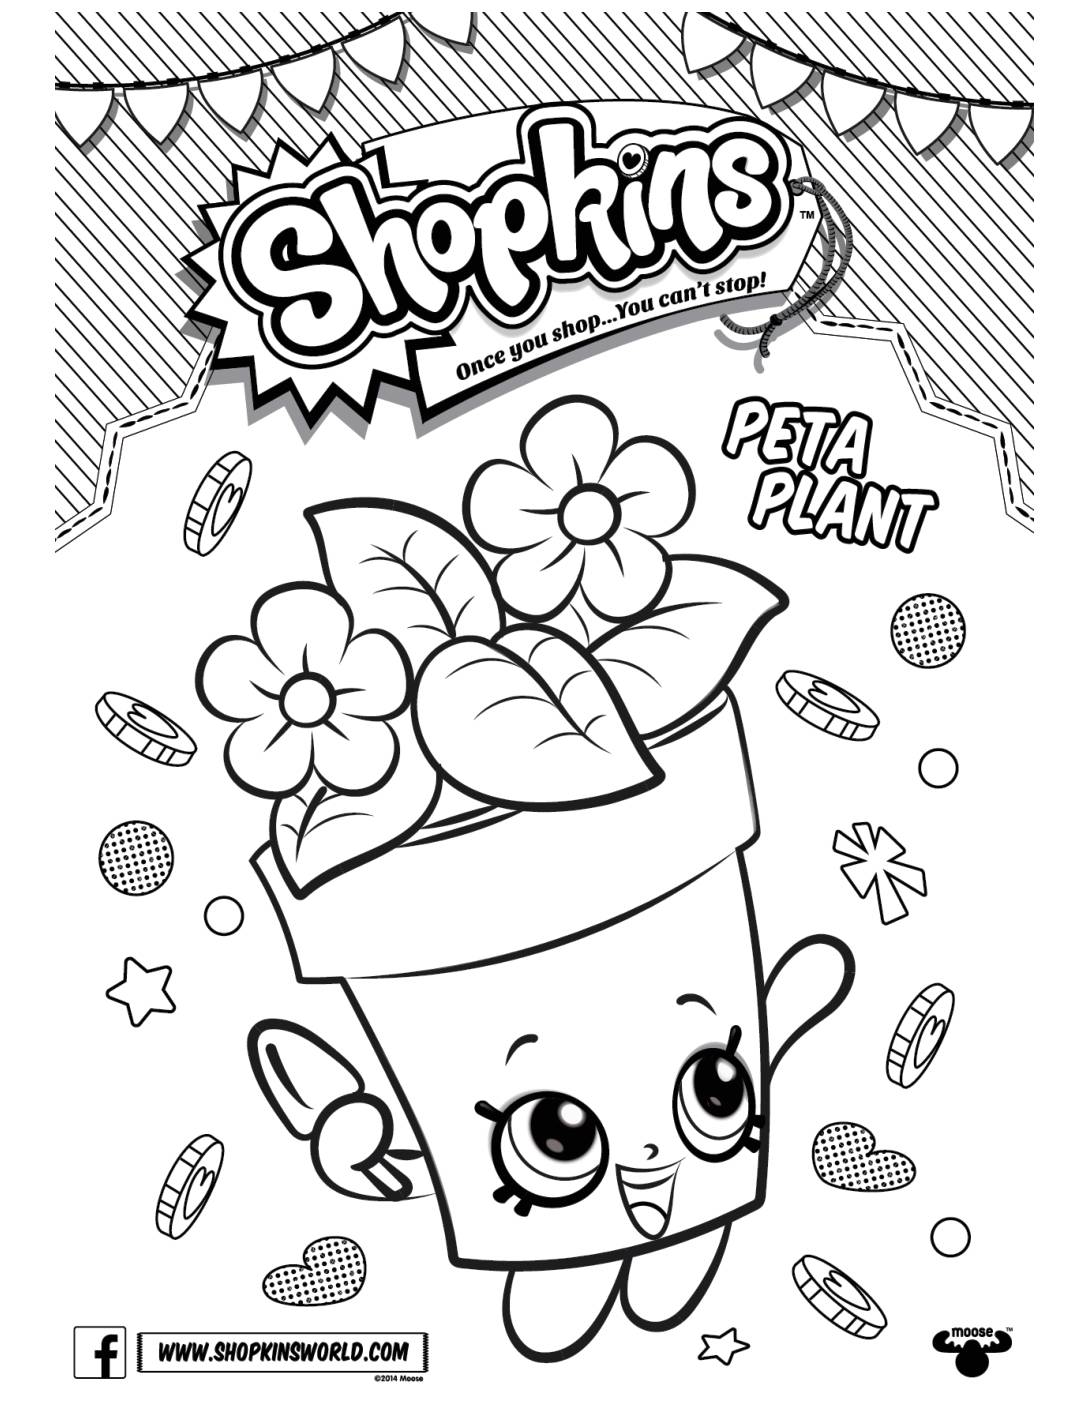 Shopkins Coloring Page 2